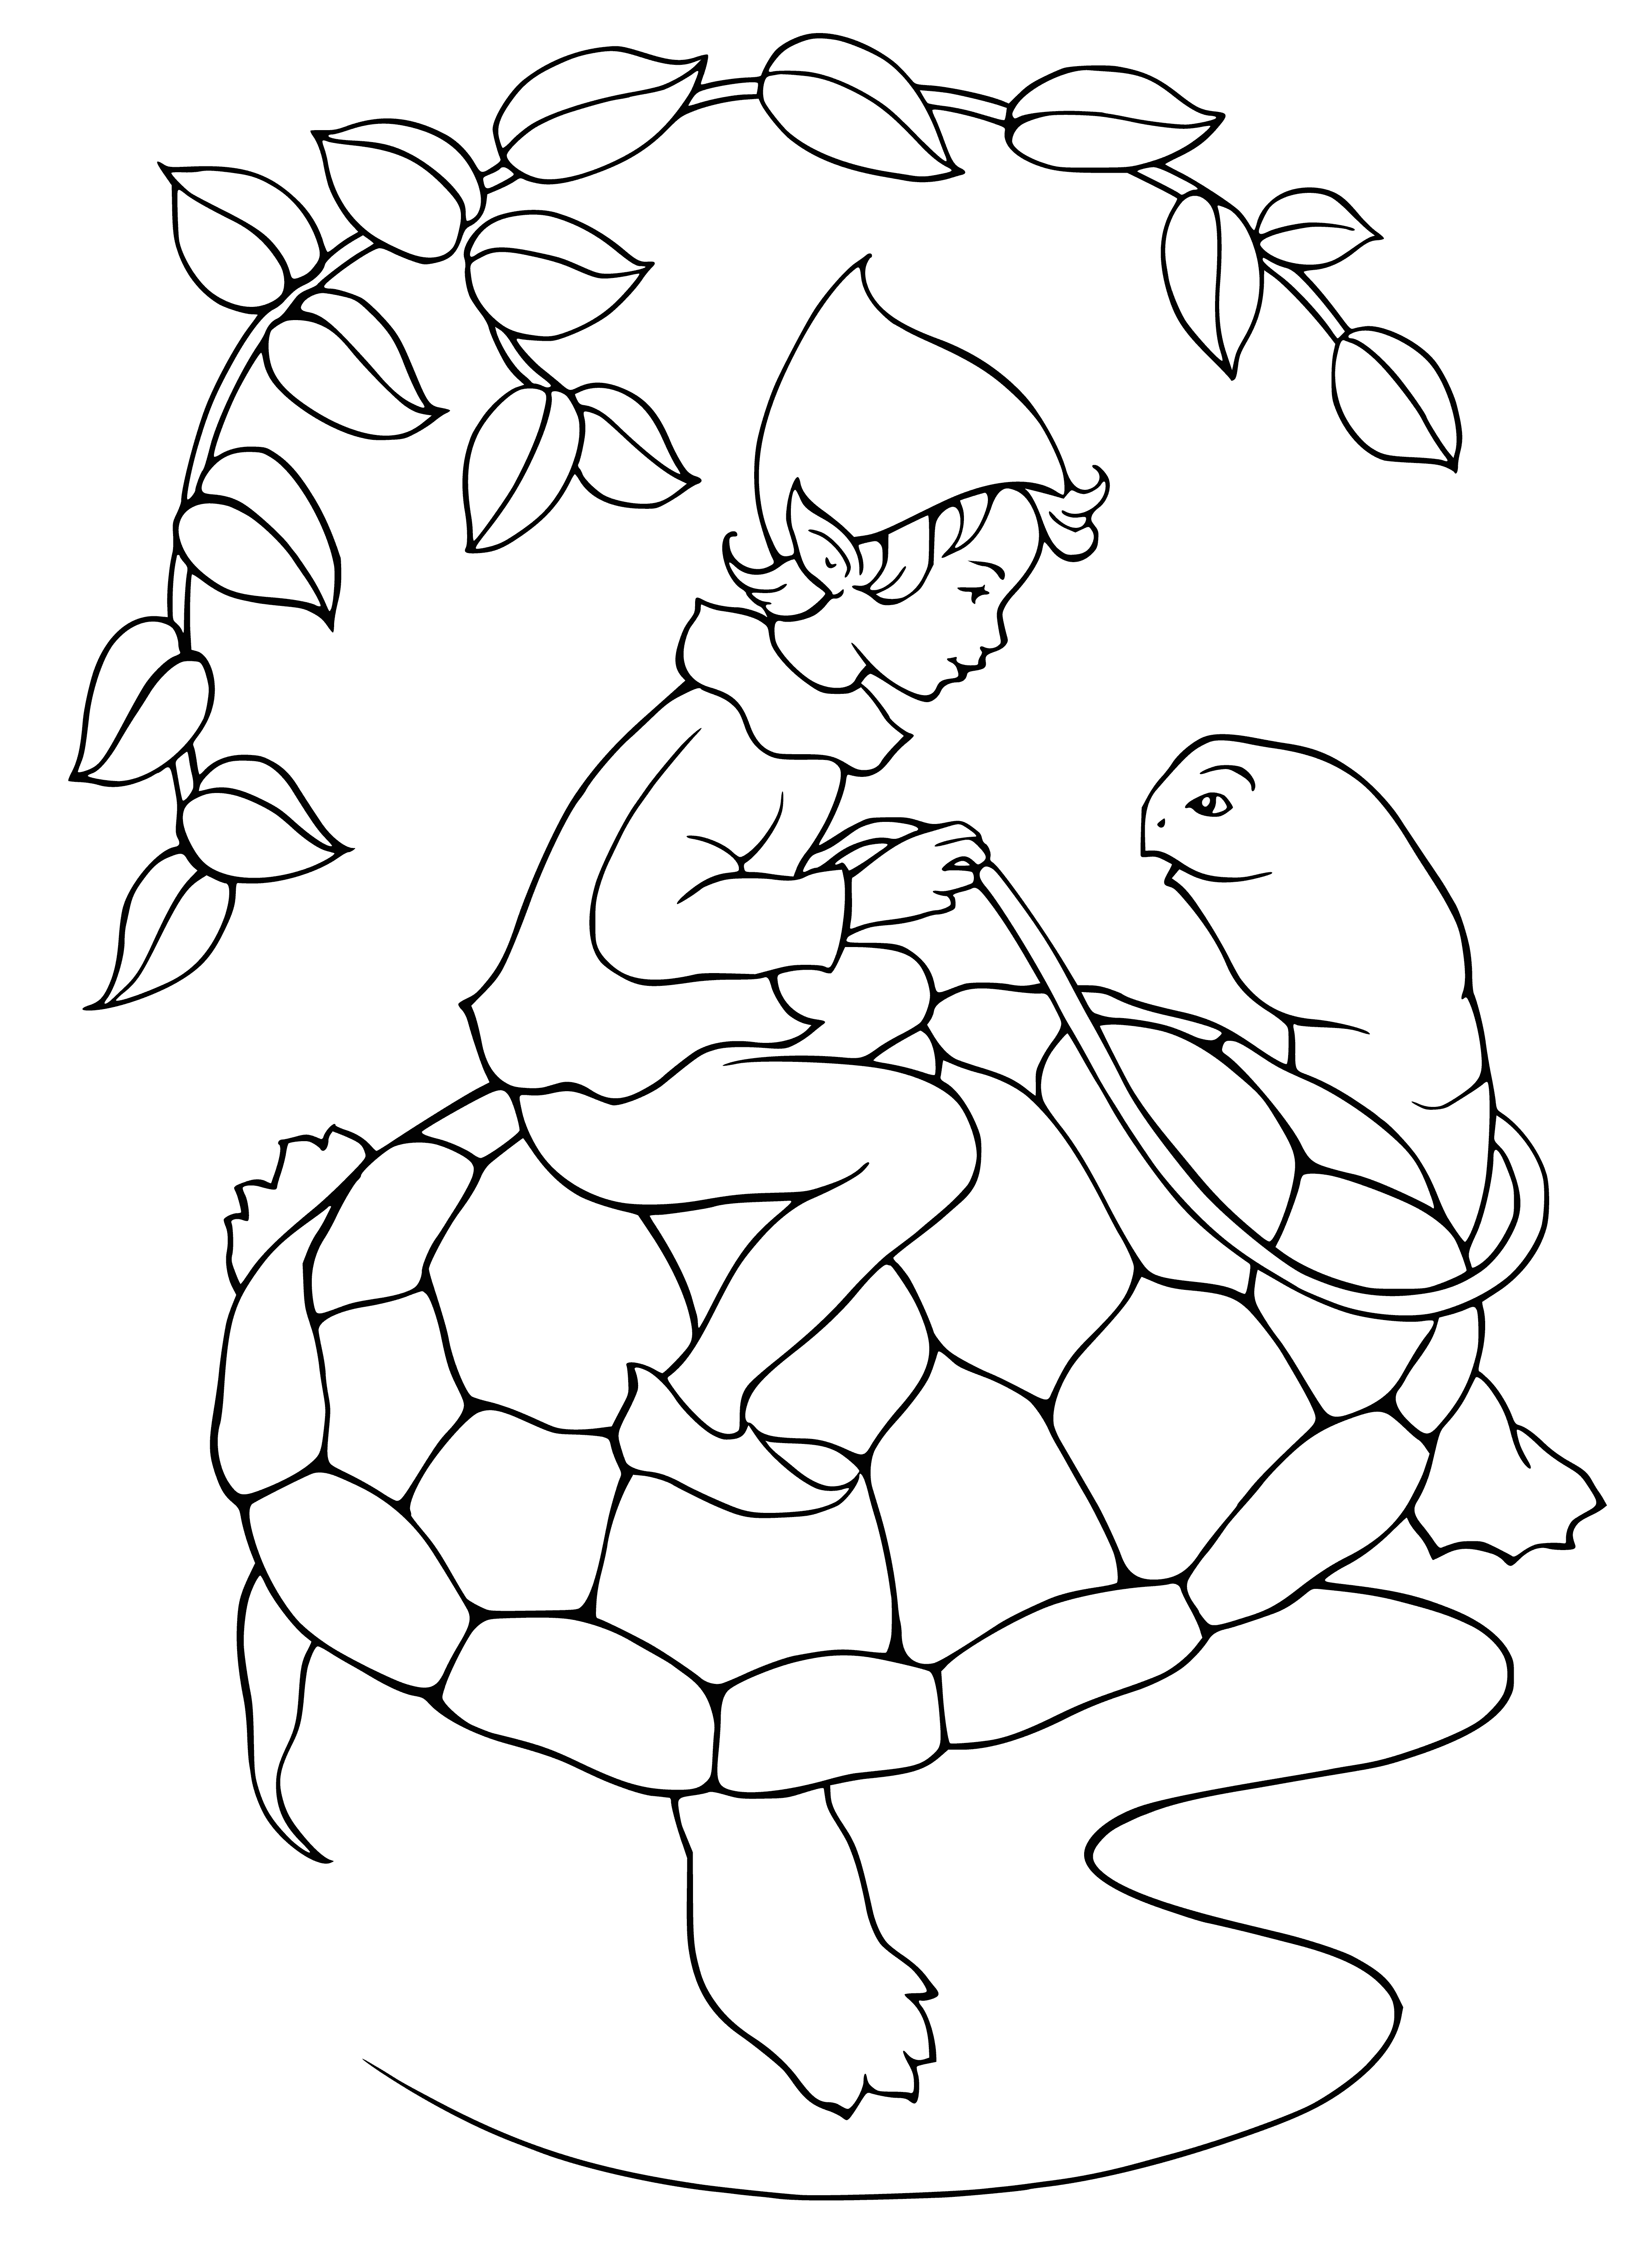 coloring page: Elf boy rides a turtle with fairy beside, waving wand and sprinkling dust. Mischievous grin, green tunic and leggings, light blue dress for fairy.